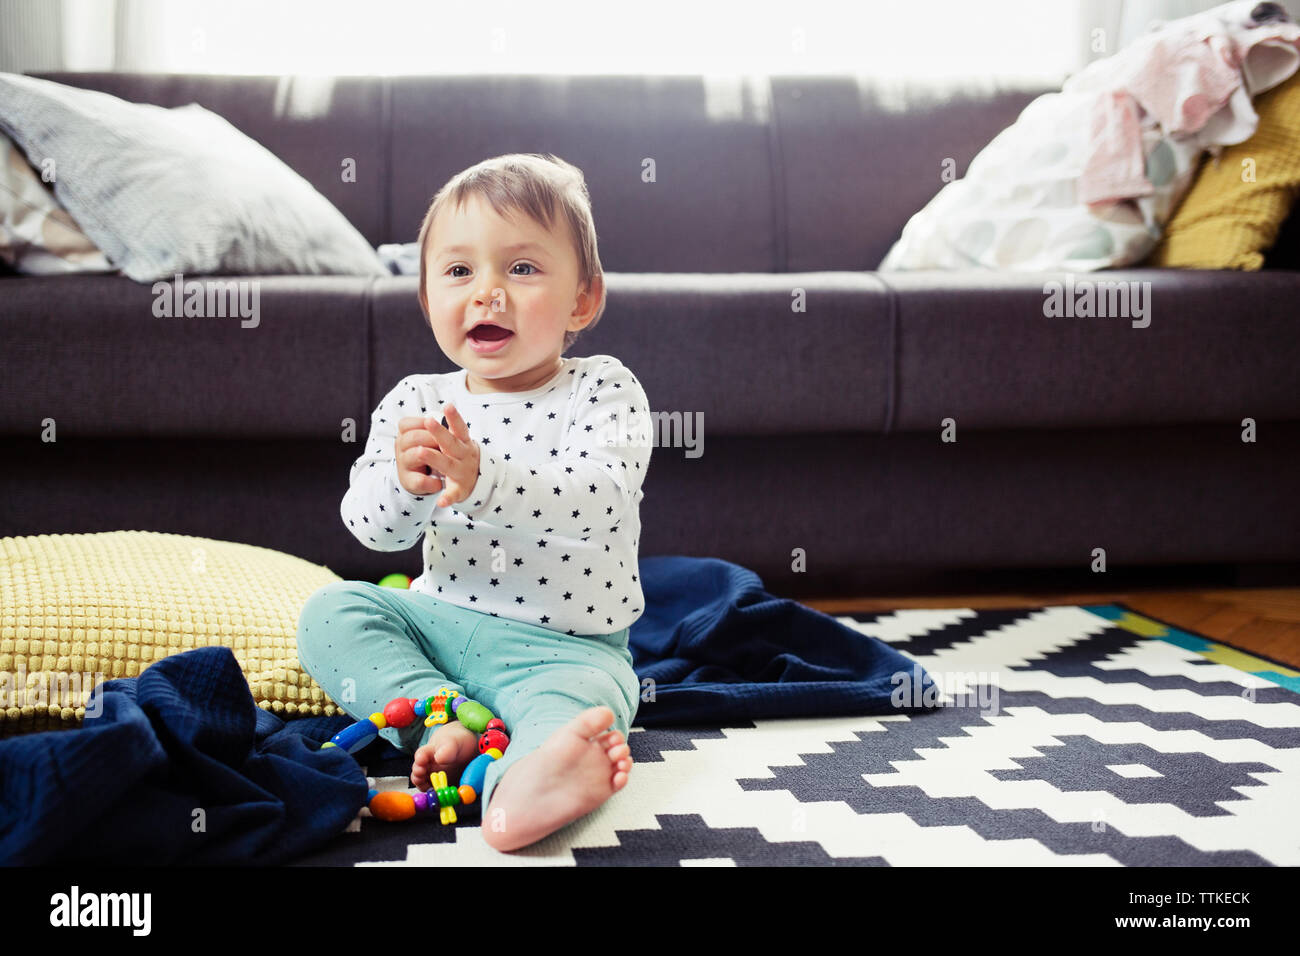 Happy baby girl sitting on rug in living room Banque D'Images